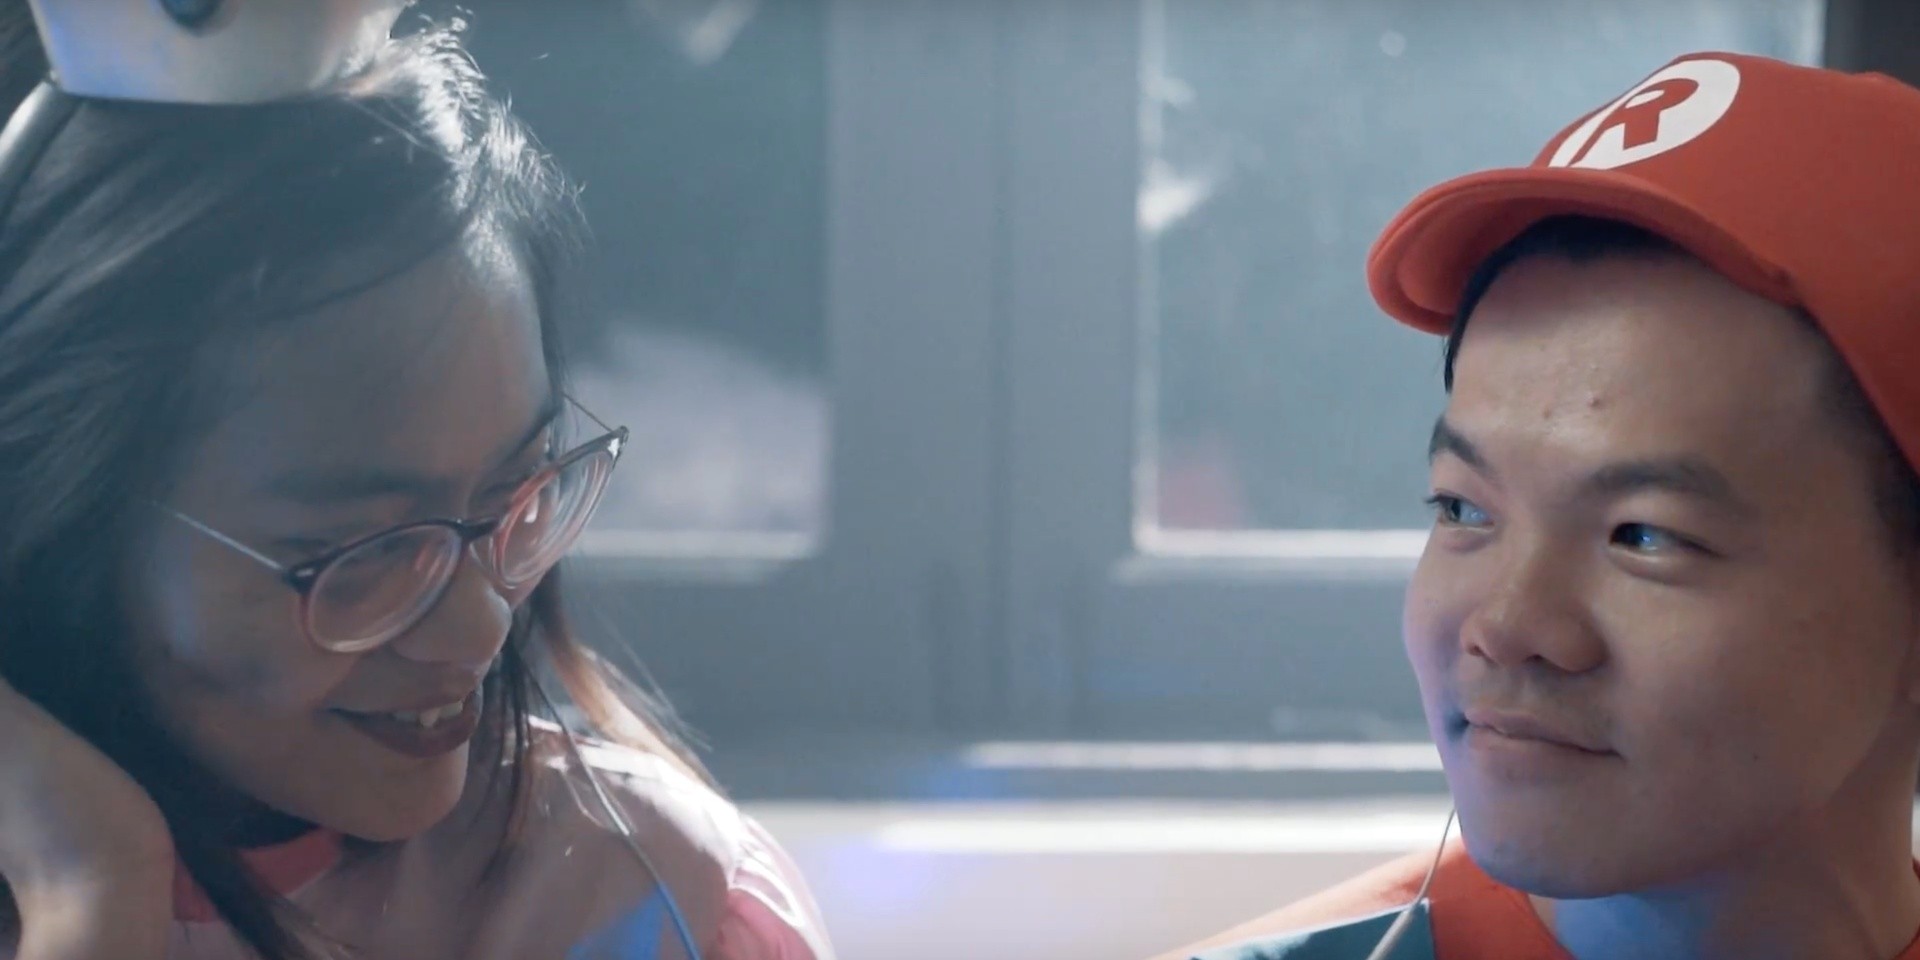 PREMIERE: Sparks fly between Mario and Princess Peach in Xingfoo&Roy's new video for 'In Another Castle' – watch